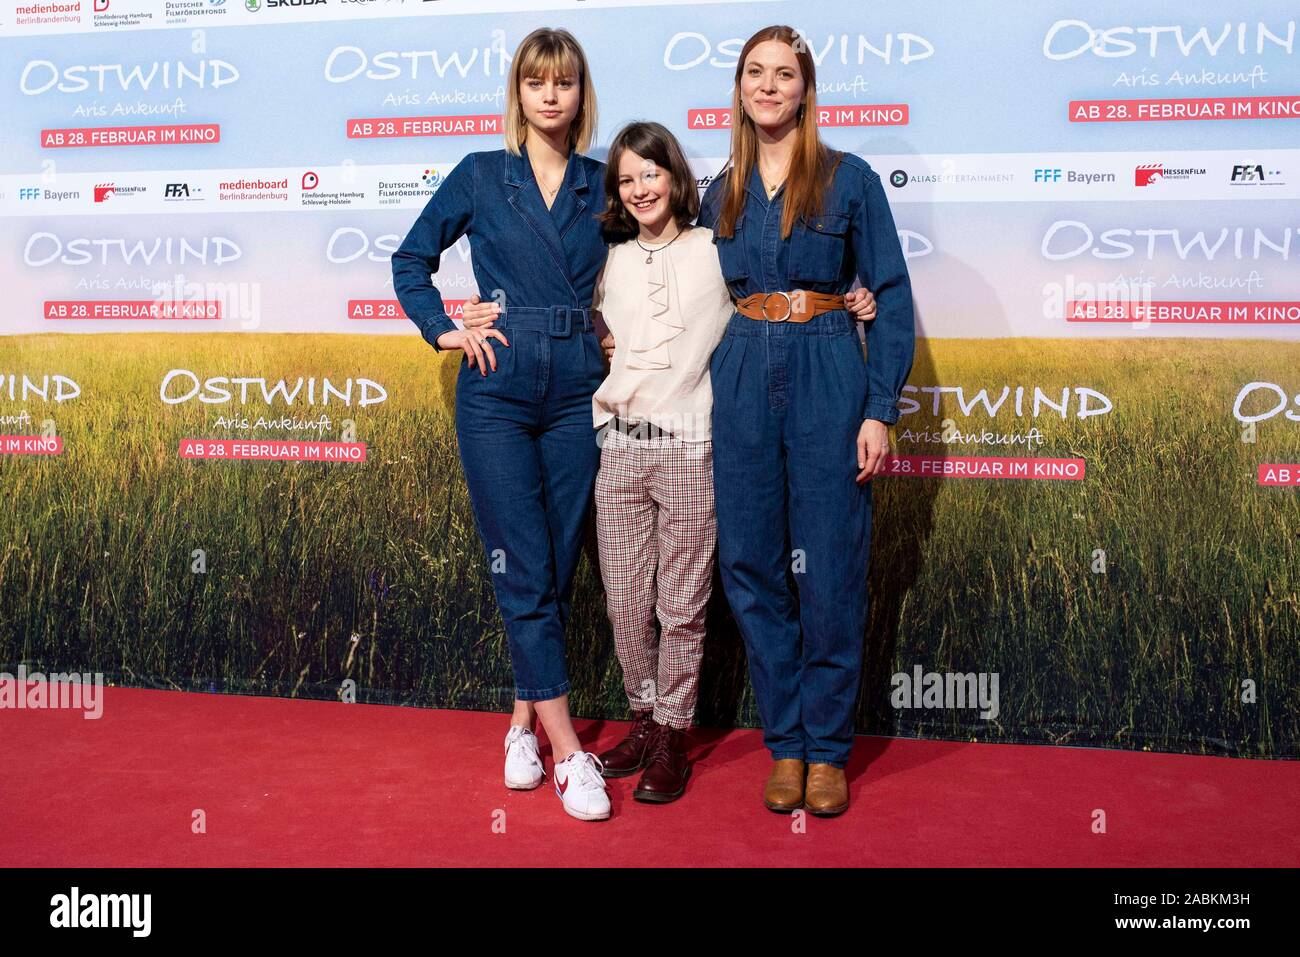 The actresses Hanna Binke (l.) and Luna Paiano from the film 'Ostwind - Aris Ankunft' pose with director Theresa von Eltz (r.) on the red carpet at Equilaland in Munich (Upper Bavaria) on Sunday, February 18, 2019. [automated translation] Stock Photo